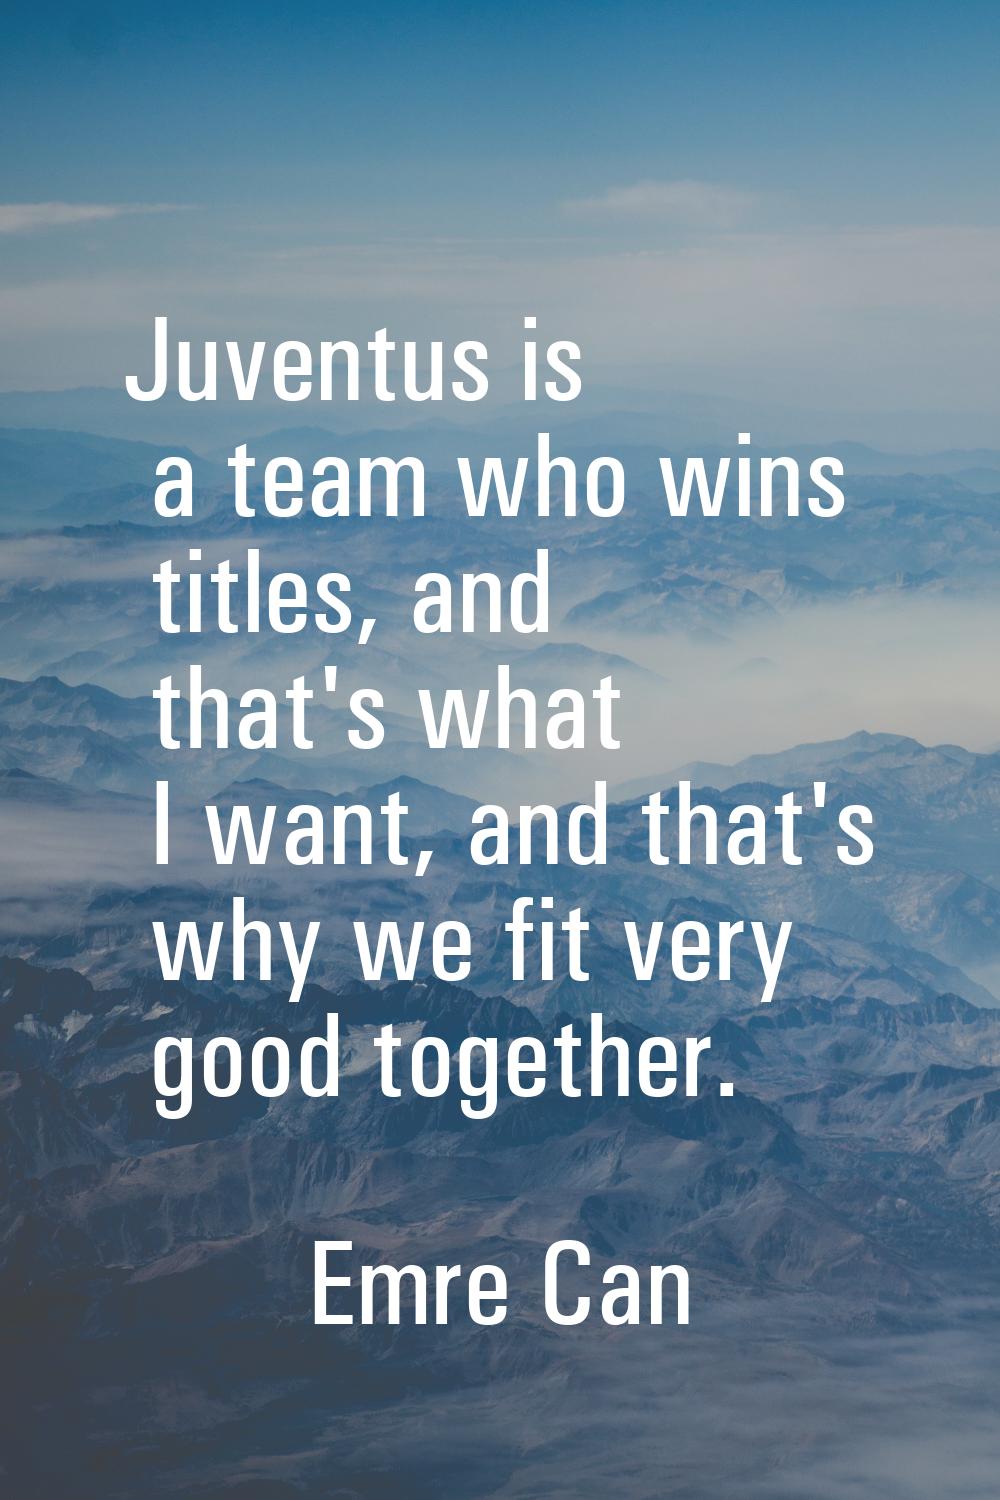 Juventus is a team who wins titles, and that's what I want, and that's why we fit very good togethe